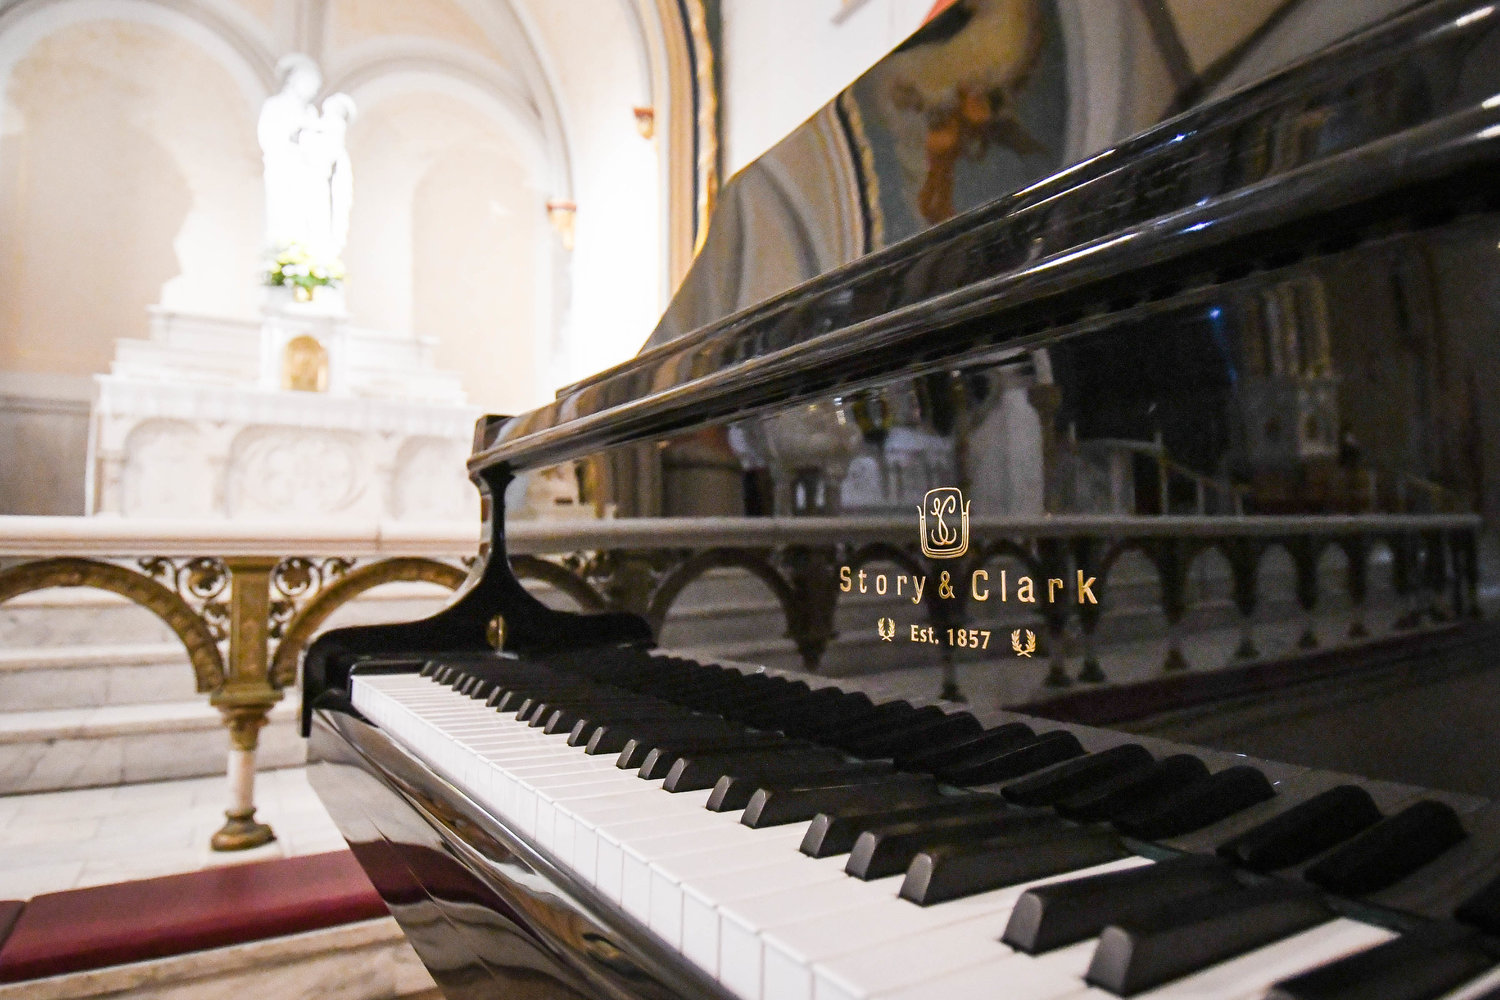 This Story and Clark piano was donated to Historic Old St. John’s Church in Utica thanks to the efforts of former St. John’s organist and choir director Alexander Meszler.